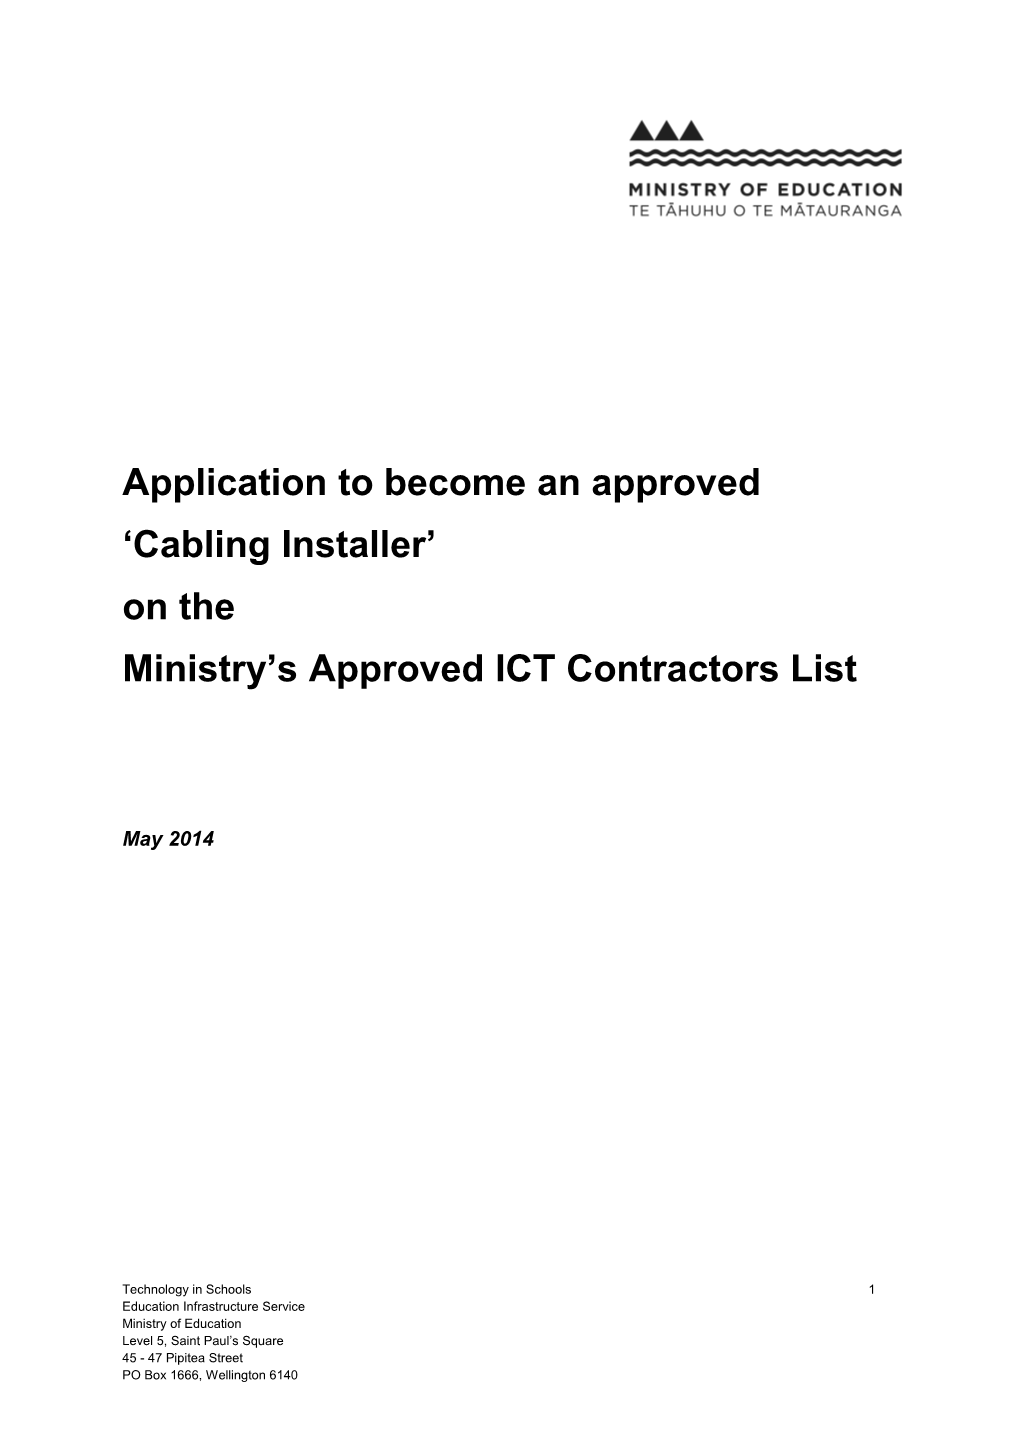 Application to Become an Approved Cabling Installer on the Ministry S Approved ICT Contractors